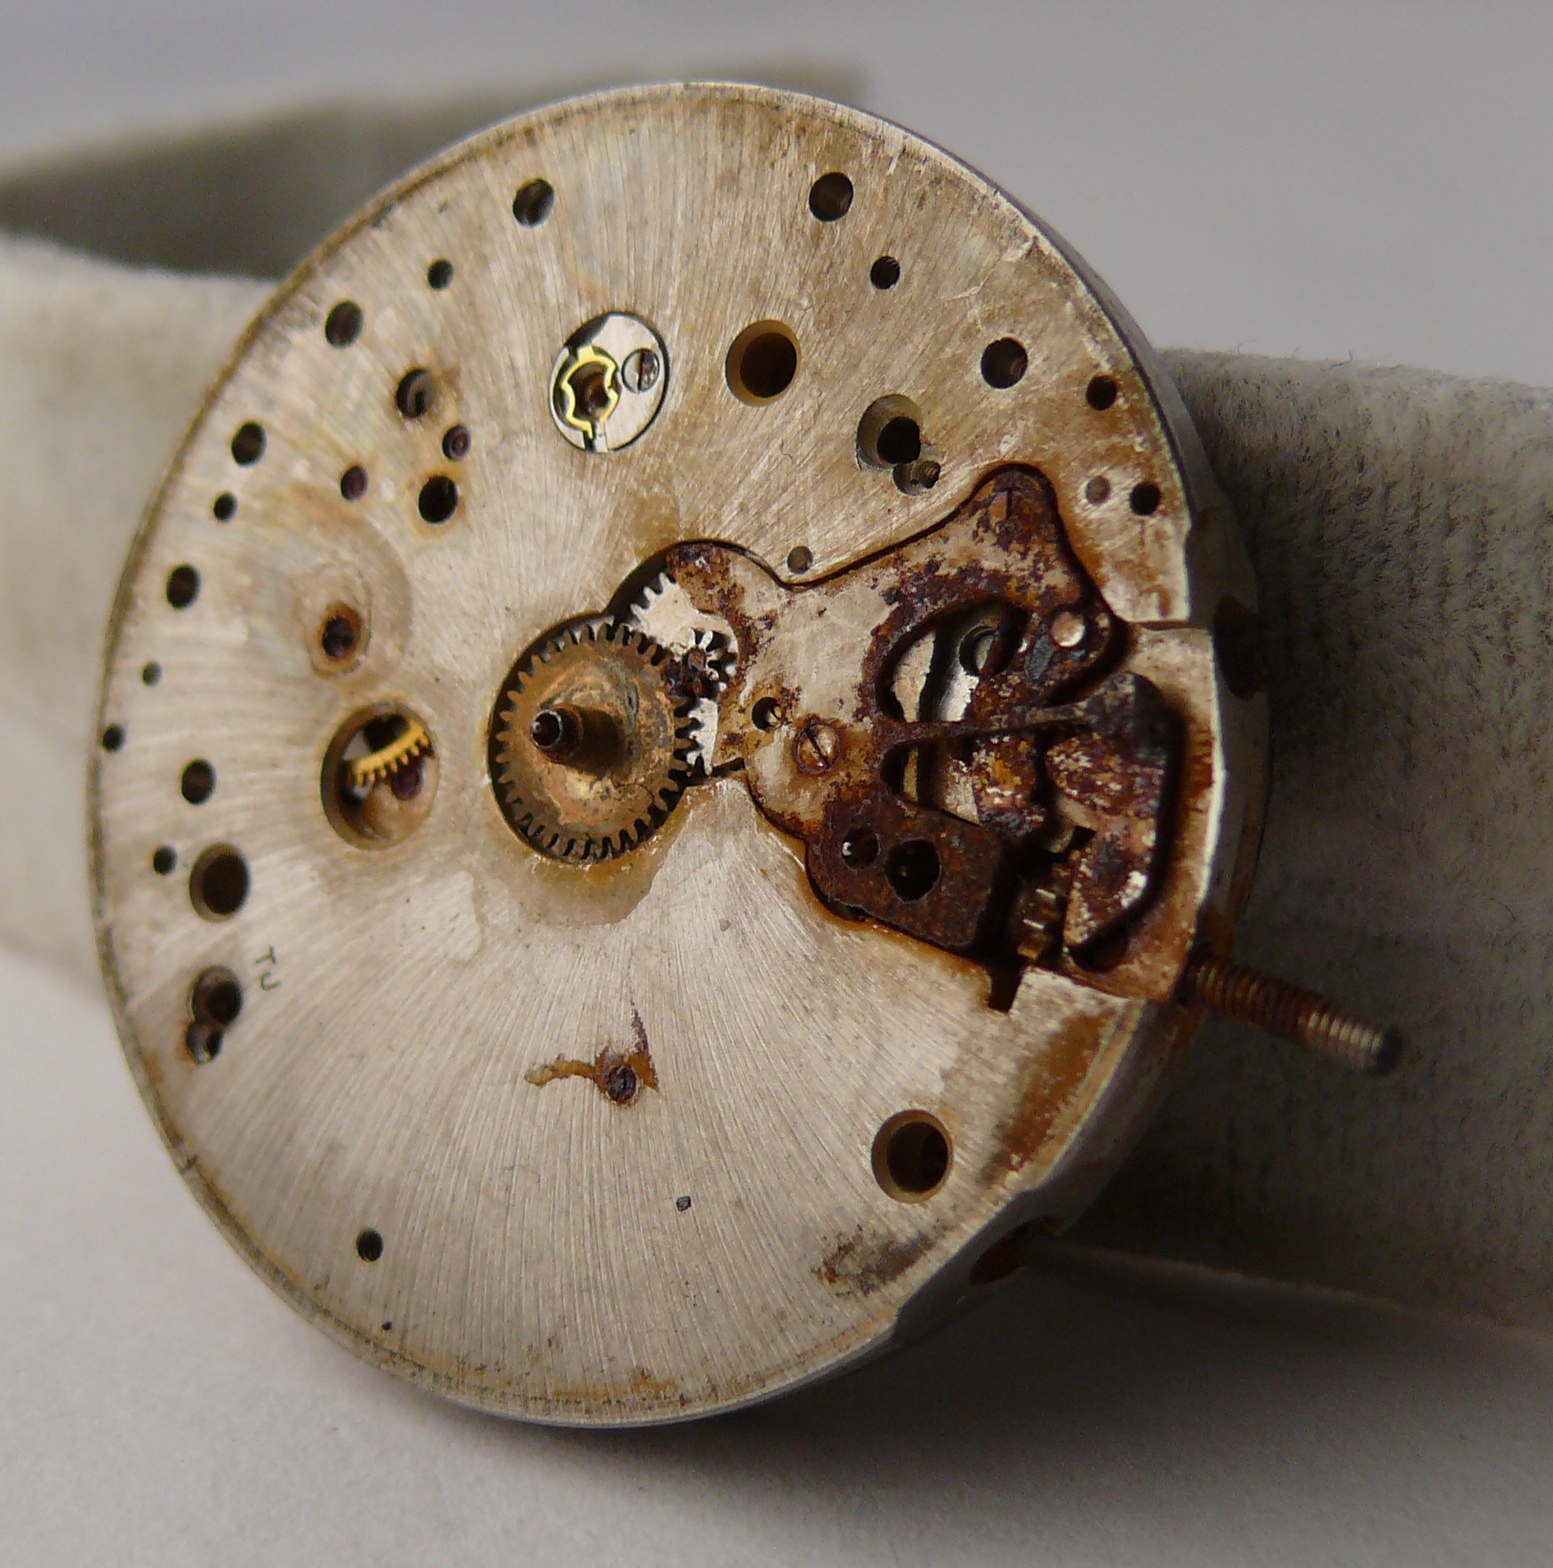 Vintage Breitling Chronograph Venus 175 Movement. Please note this movement has had severe water